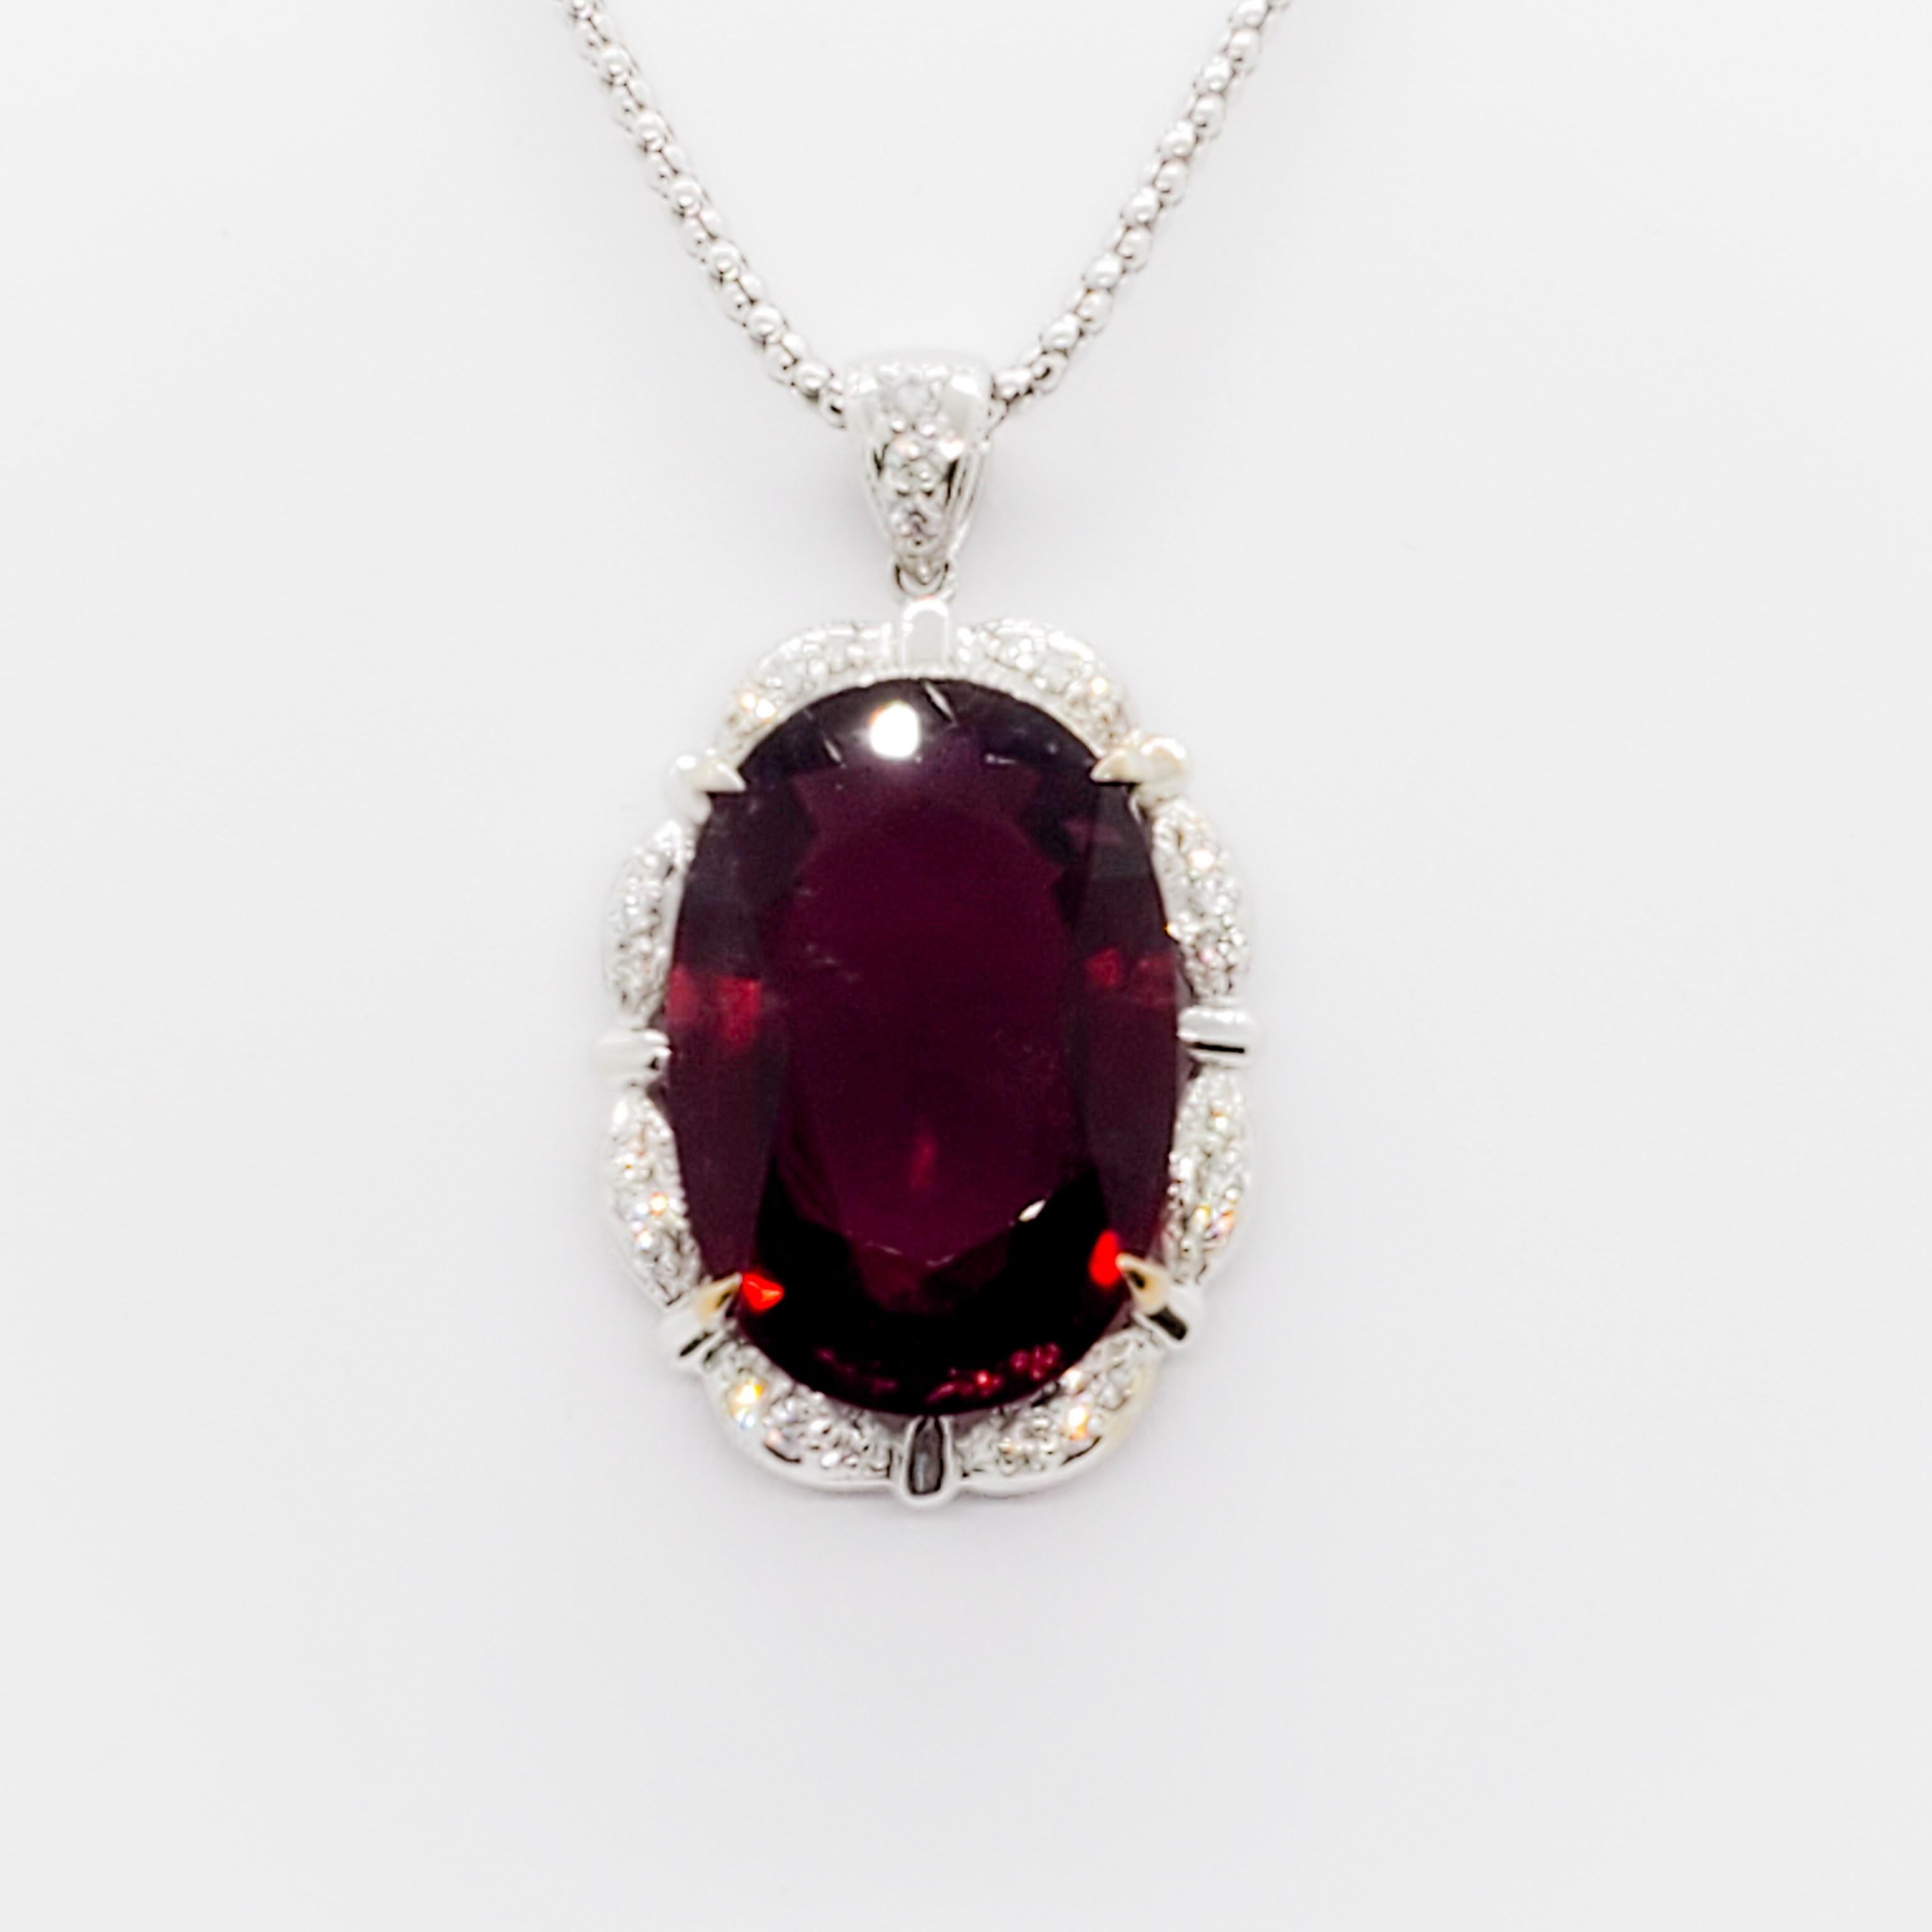 Impressive 28.04 ct rubellite oval with a deep rich red color and 0.53 ct of good quality, white, and bright diamond rounds in a handmade 18k white gold mounting.  Length of chain is 18